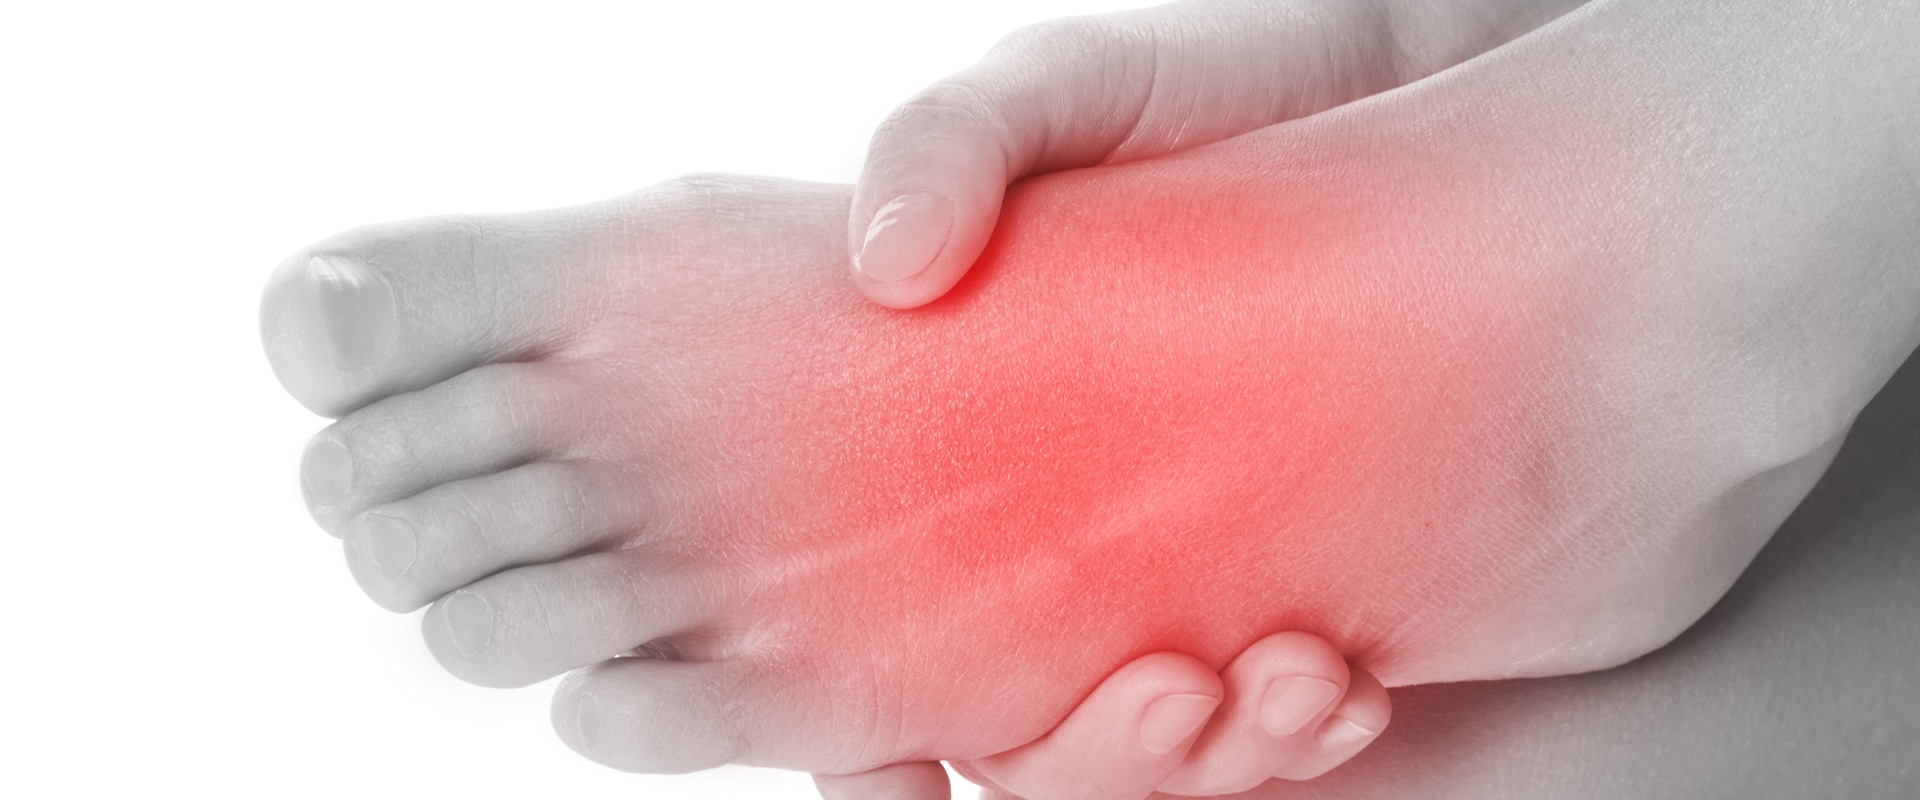 Can stem cells cure neuropathy?